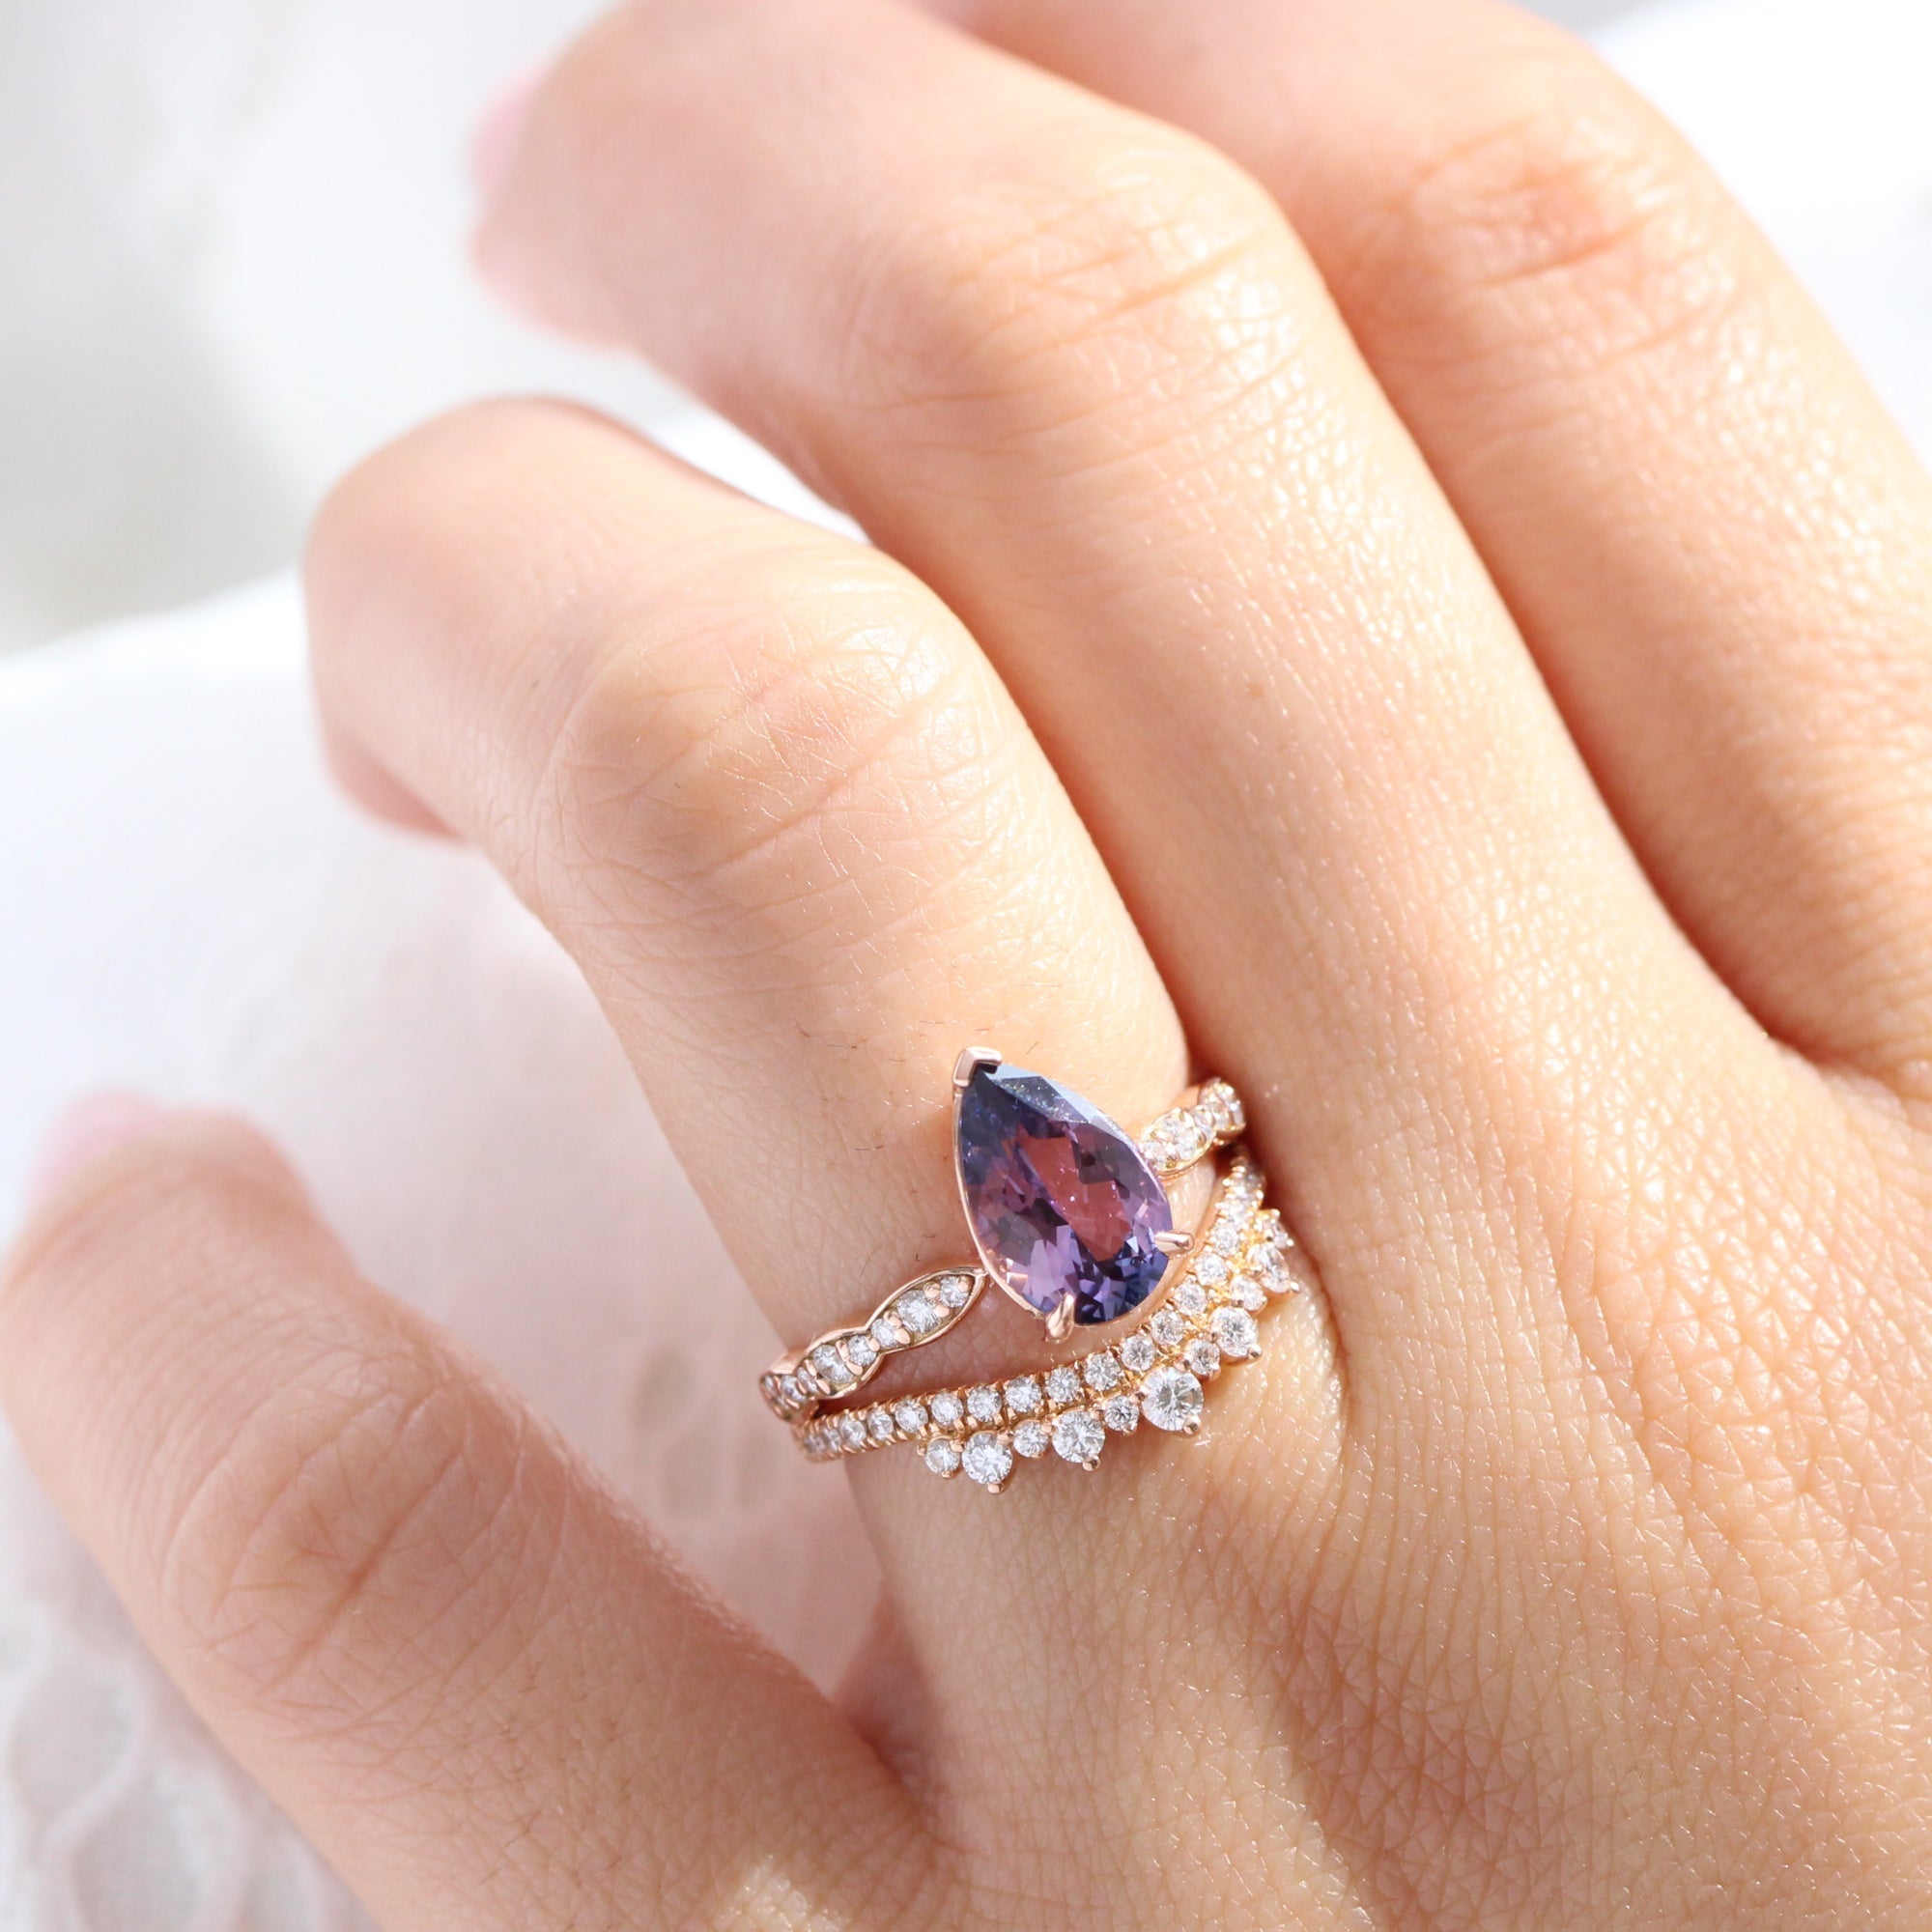 Rare blue and purple parti sapphire ring rose gold low set engagement ring la more design jewelry